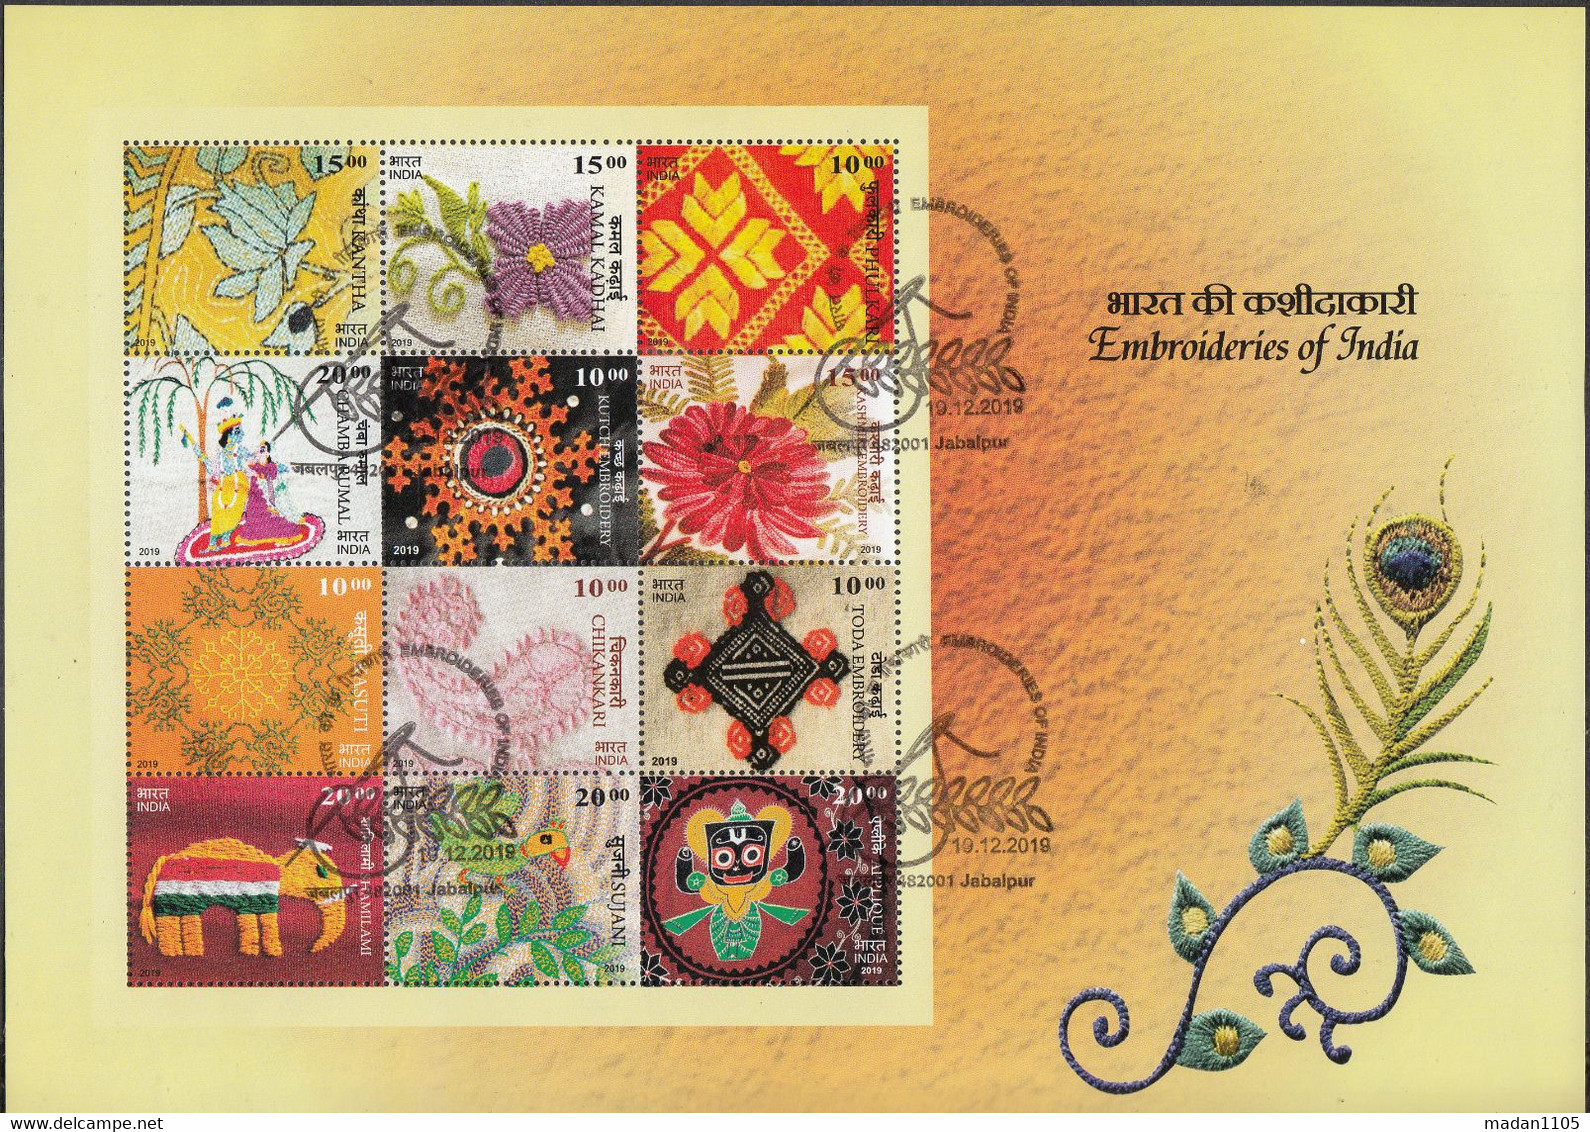 INDIA 2019 EMBROIDERY, EMBROIDERIES  Of India , Miniature Sheet, FIRST DAY, JABALPUR Cancelled - Used Stamps